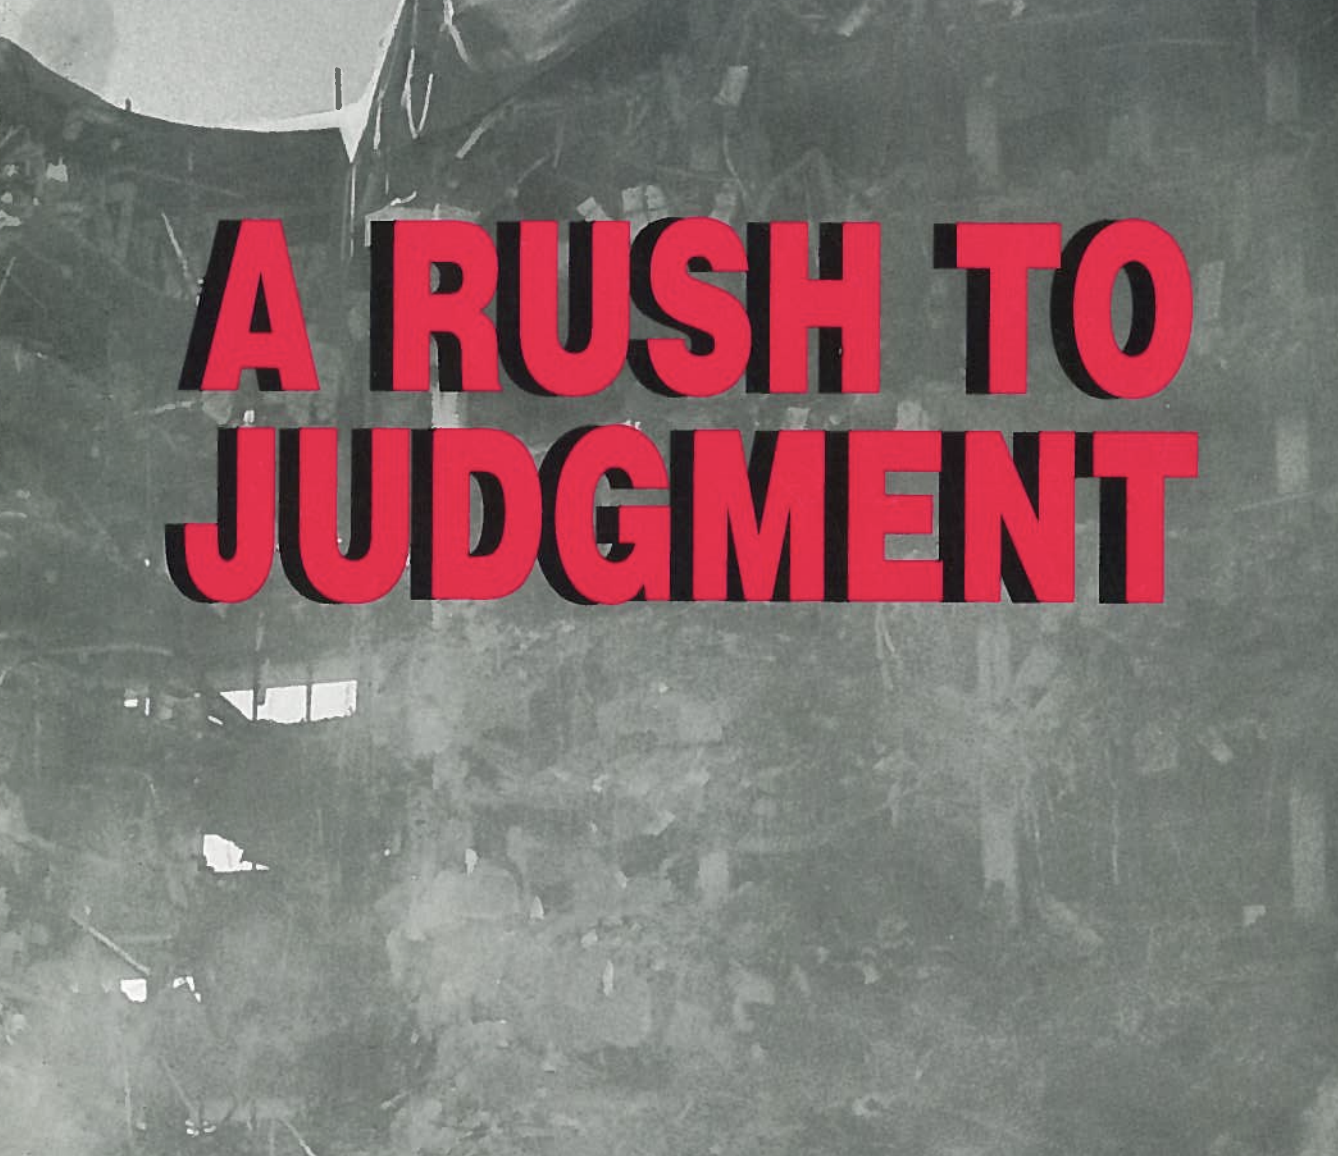 1995 Civil Rights Report: A Rush to Judgement